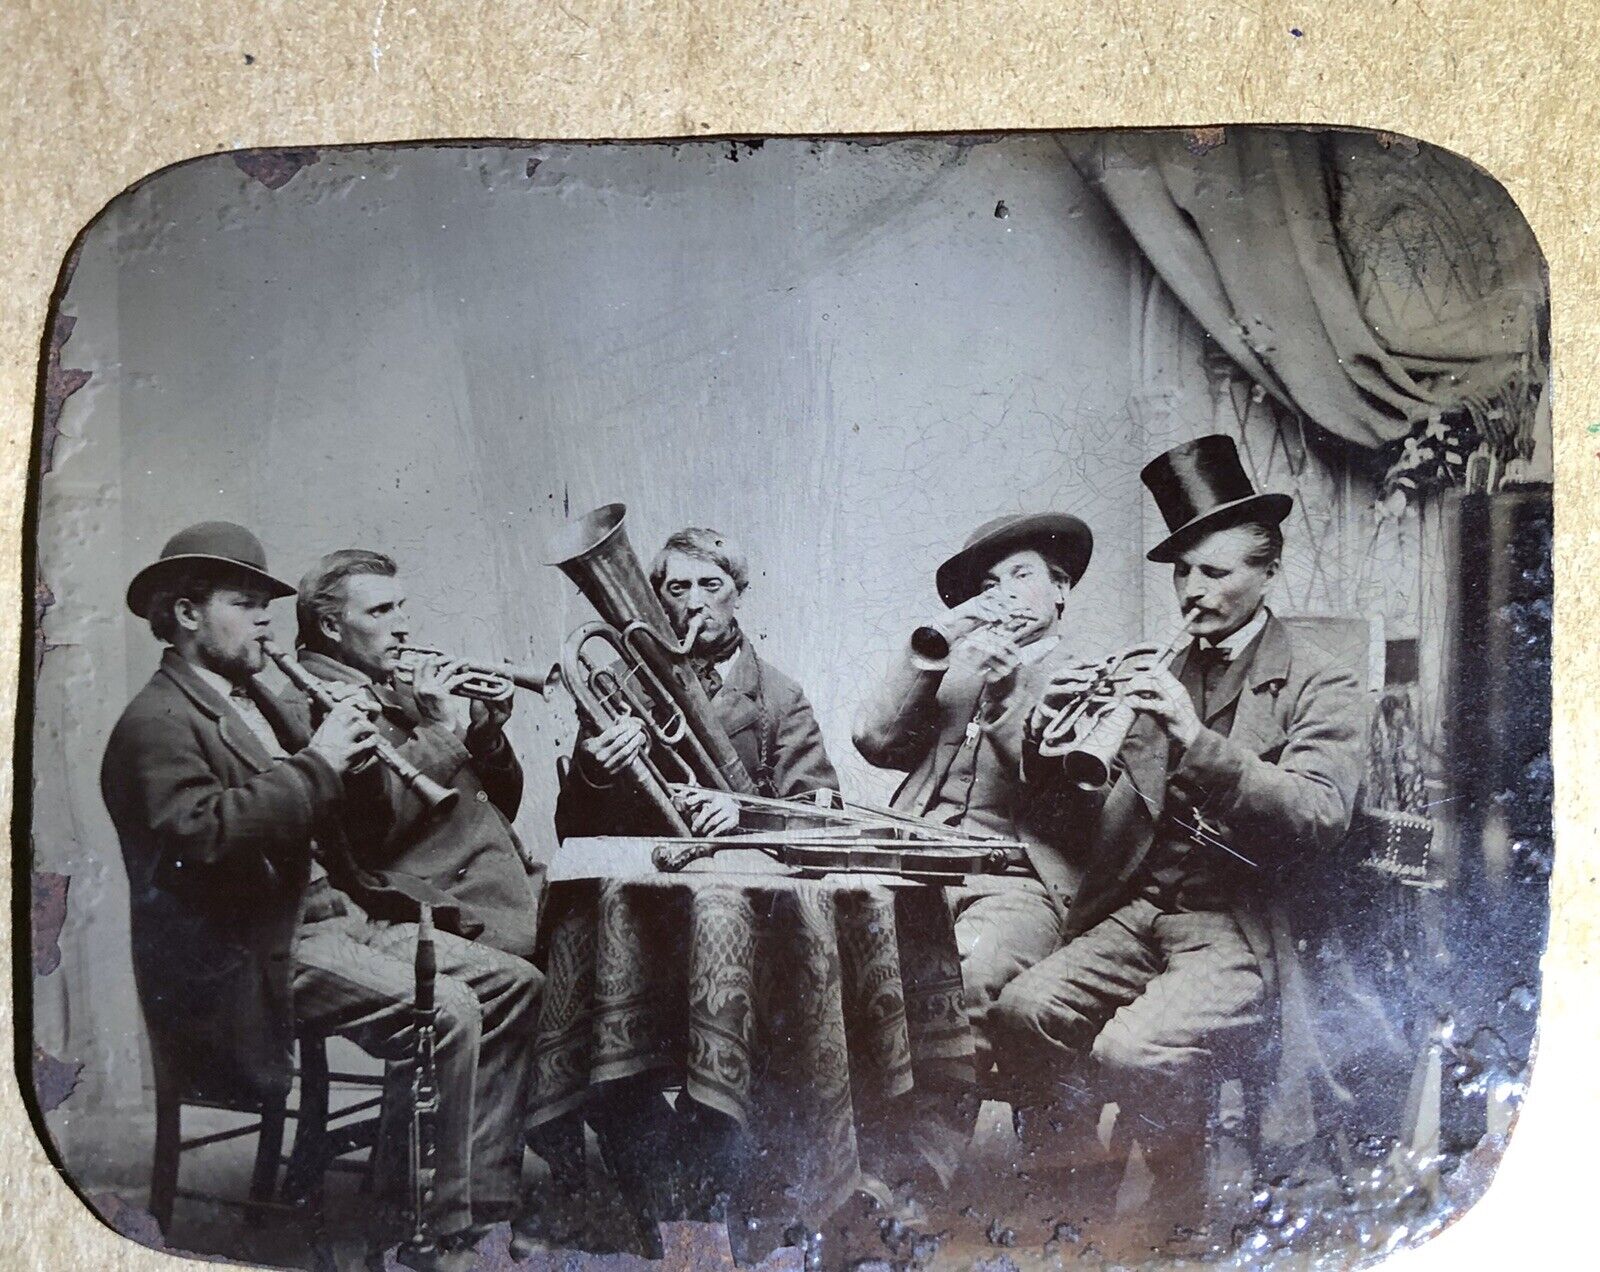 Rare 1860s Tintype Photo Group of Musicians at Table Playing Music Instruments 